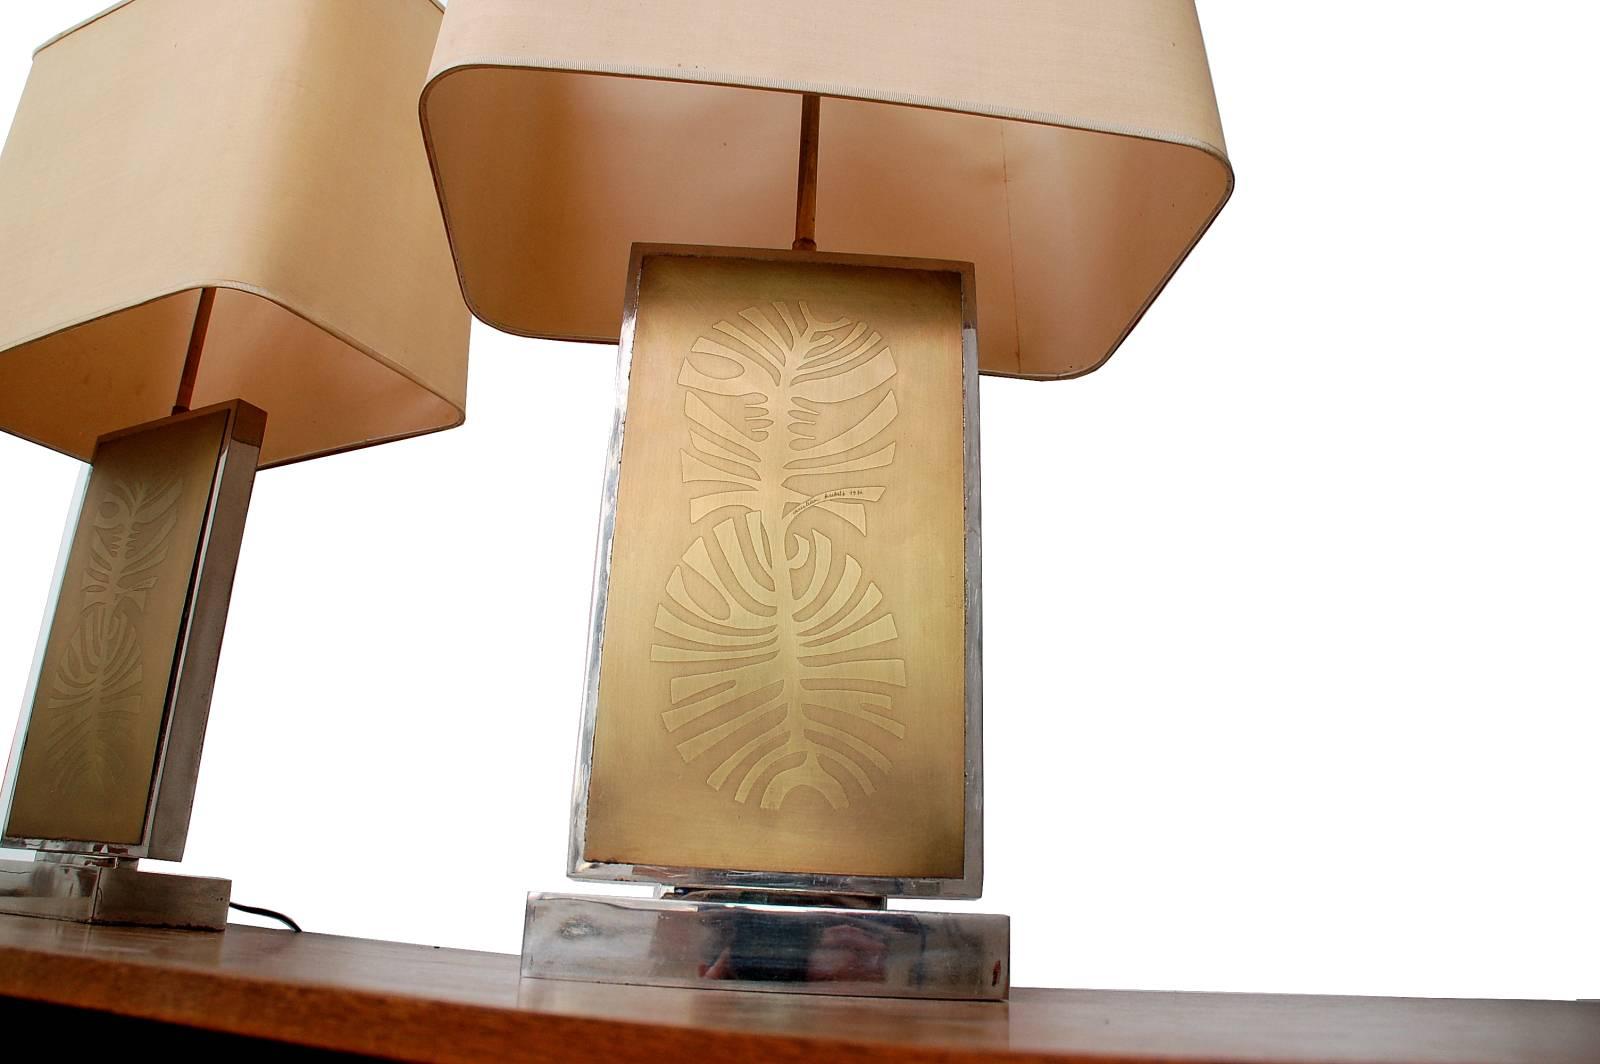 Amazing set of two monumental table lamps in chromed metal and brass. A stunning drawing of a leaf is etched into the front. The design of these lamps is by the Belgian artist Christian Krekels who signed them in 1976. The original lampshades are